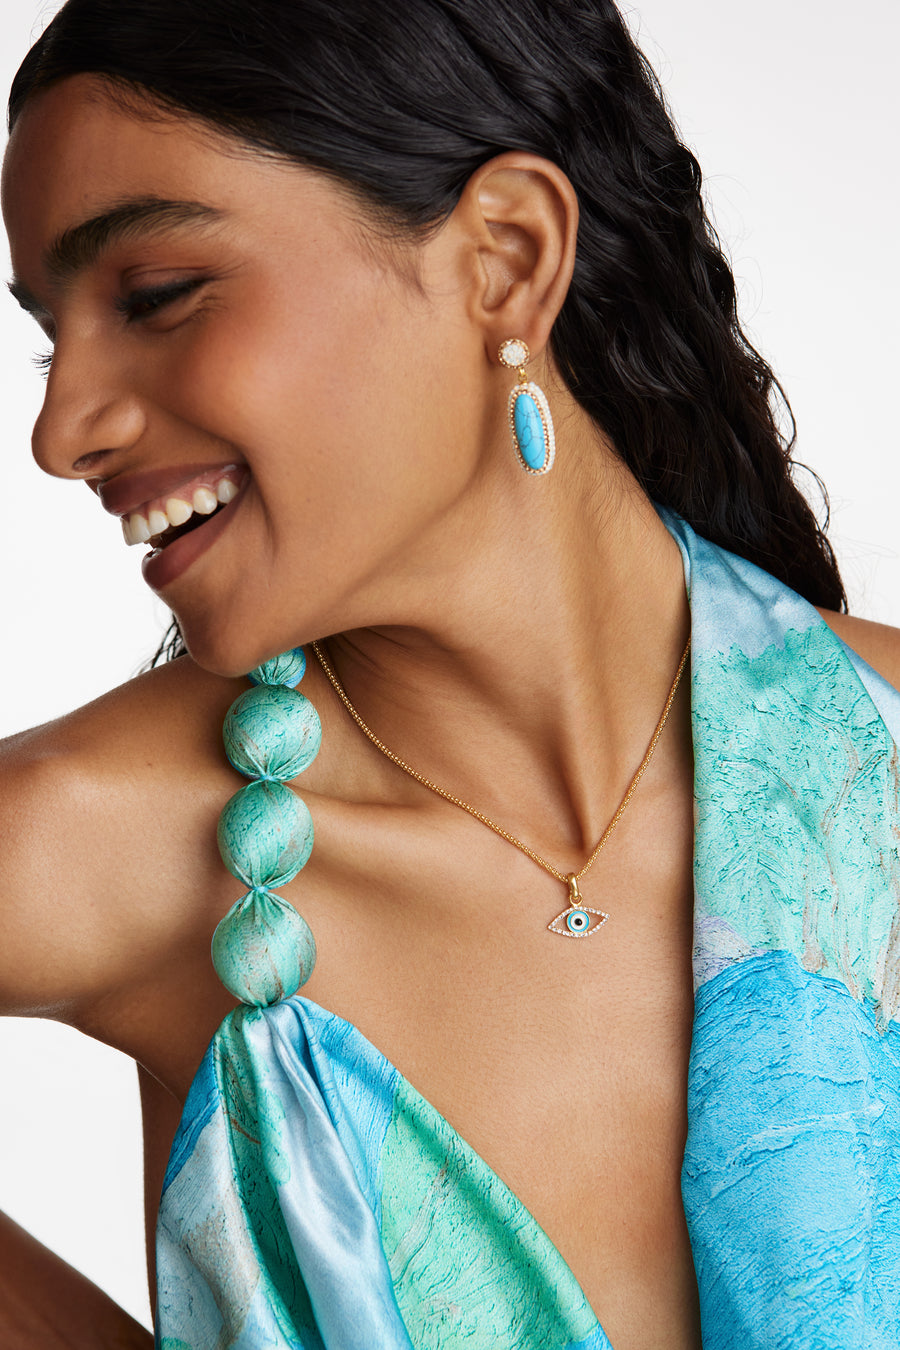 model shot wearing the crystal evil eye charm on a chain and also wearing turquoise drop earrings while smiling